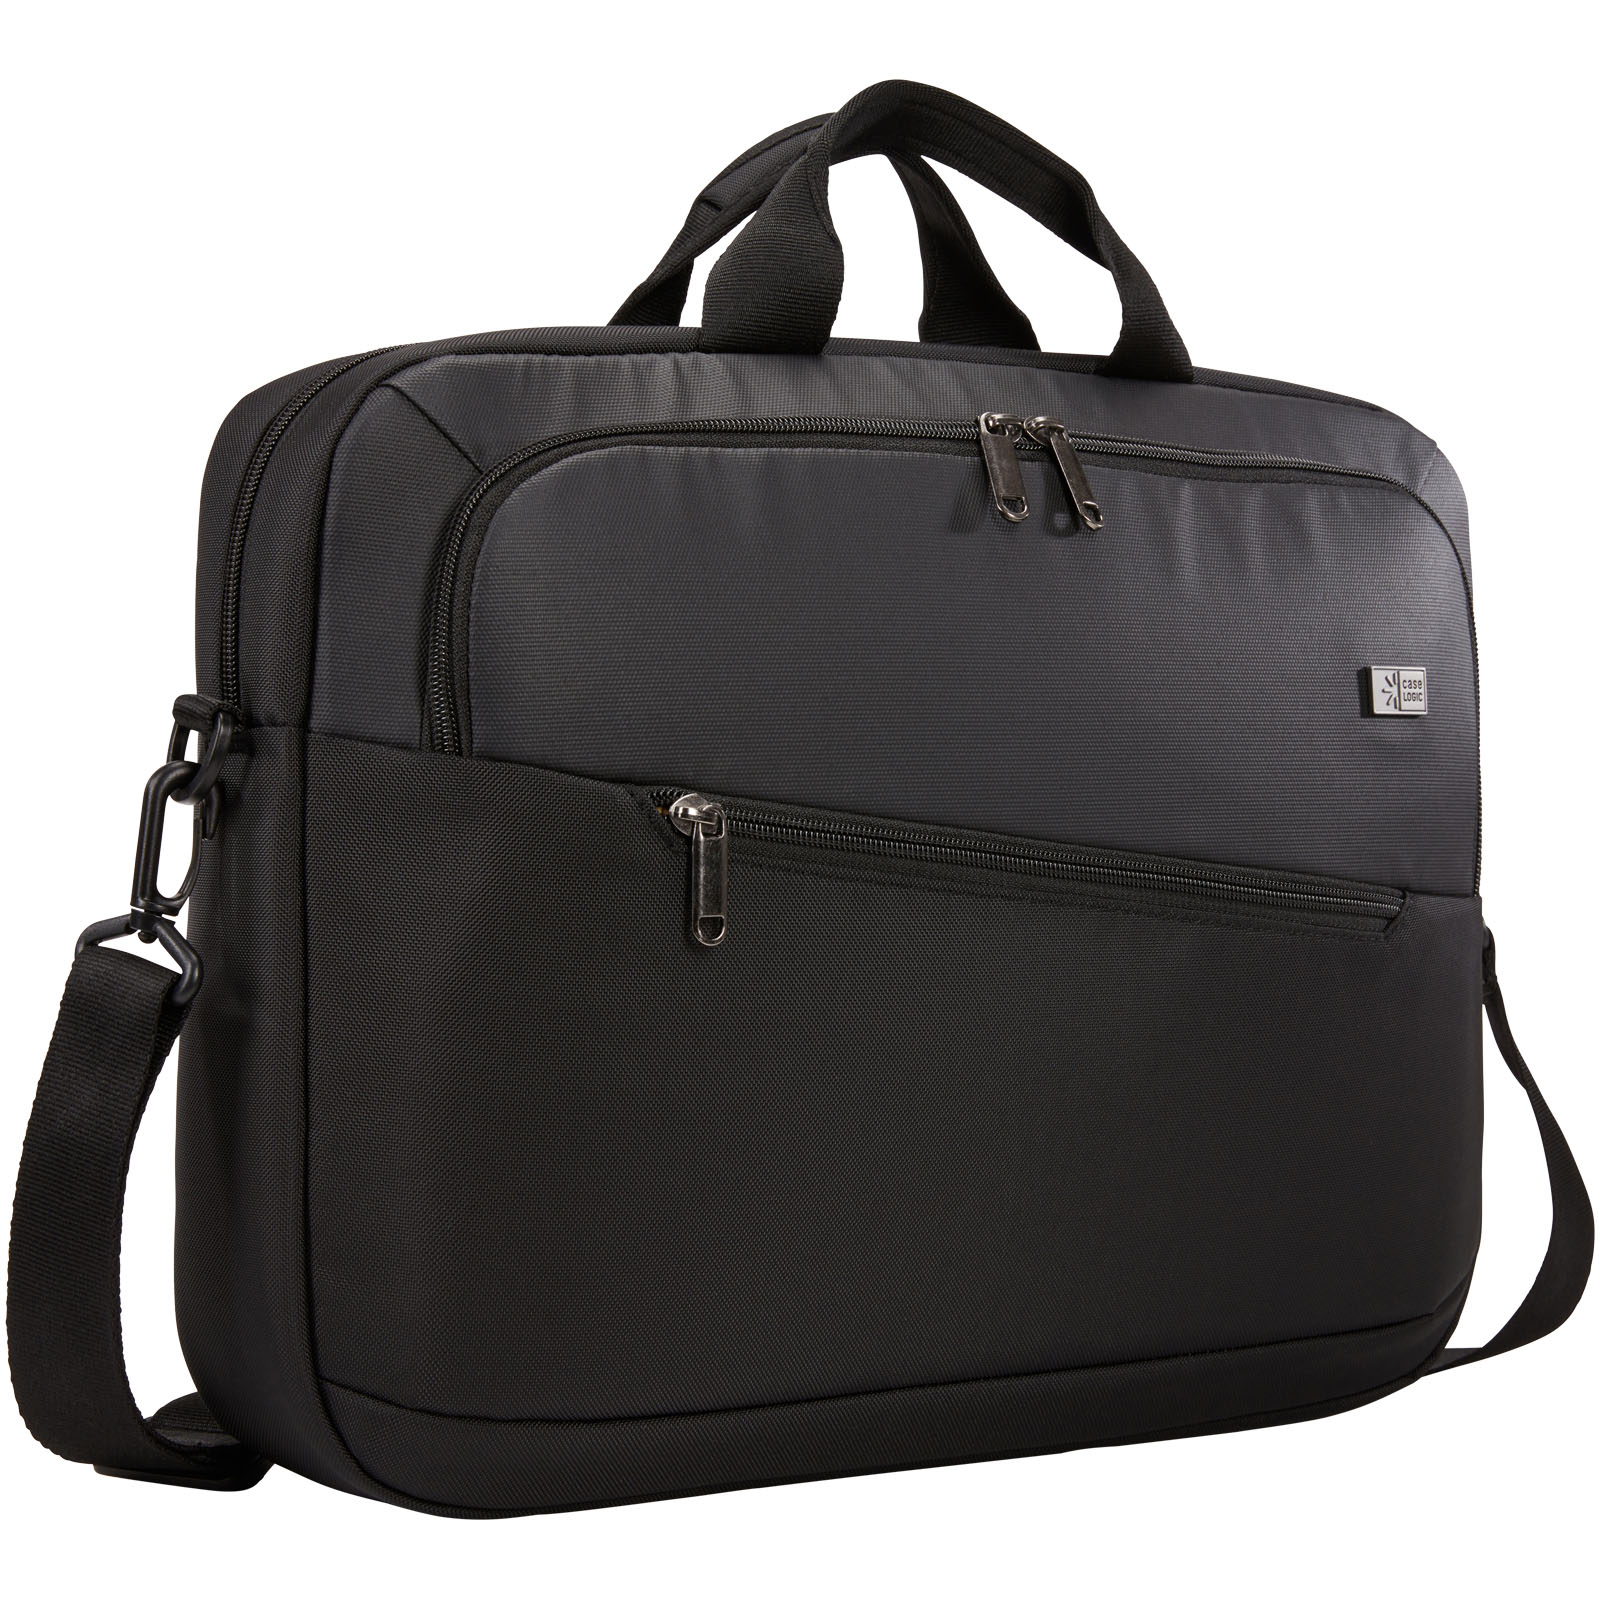 Conference bags - Case Logic Propel 15.6